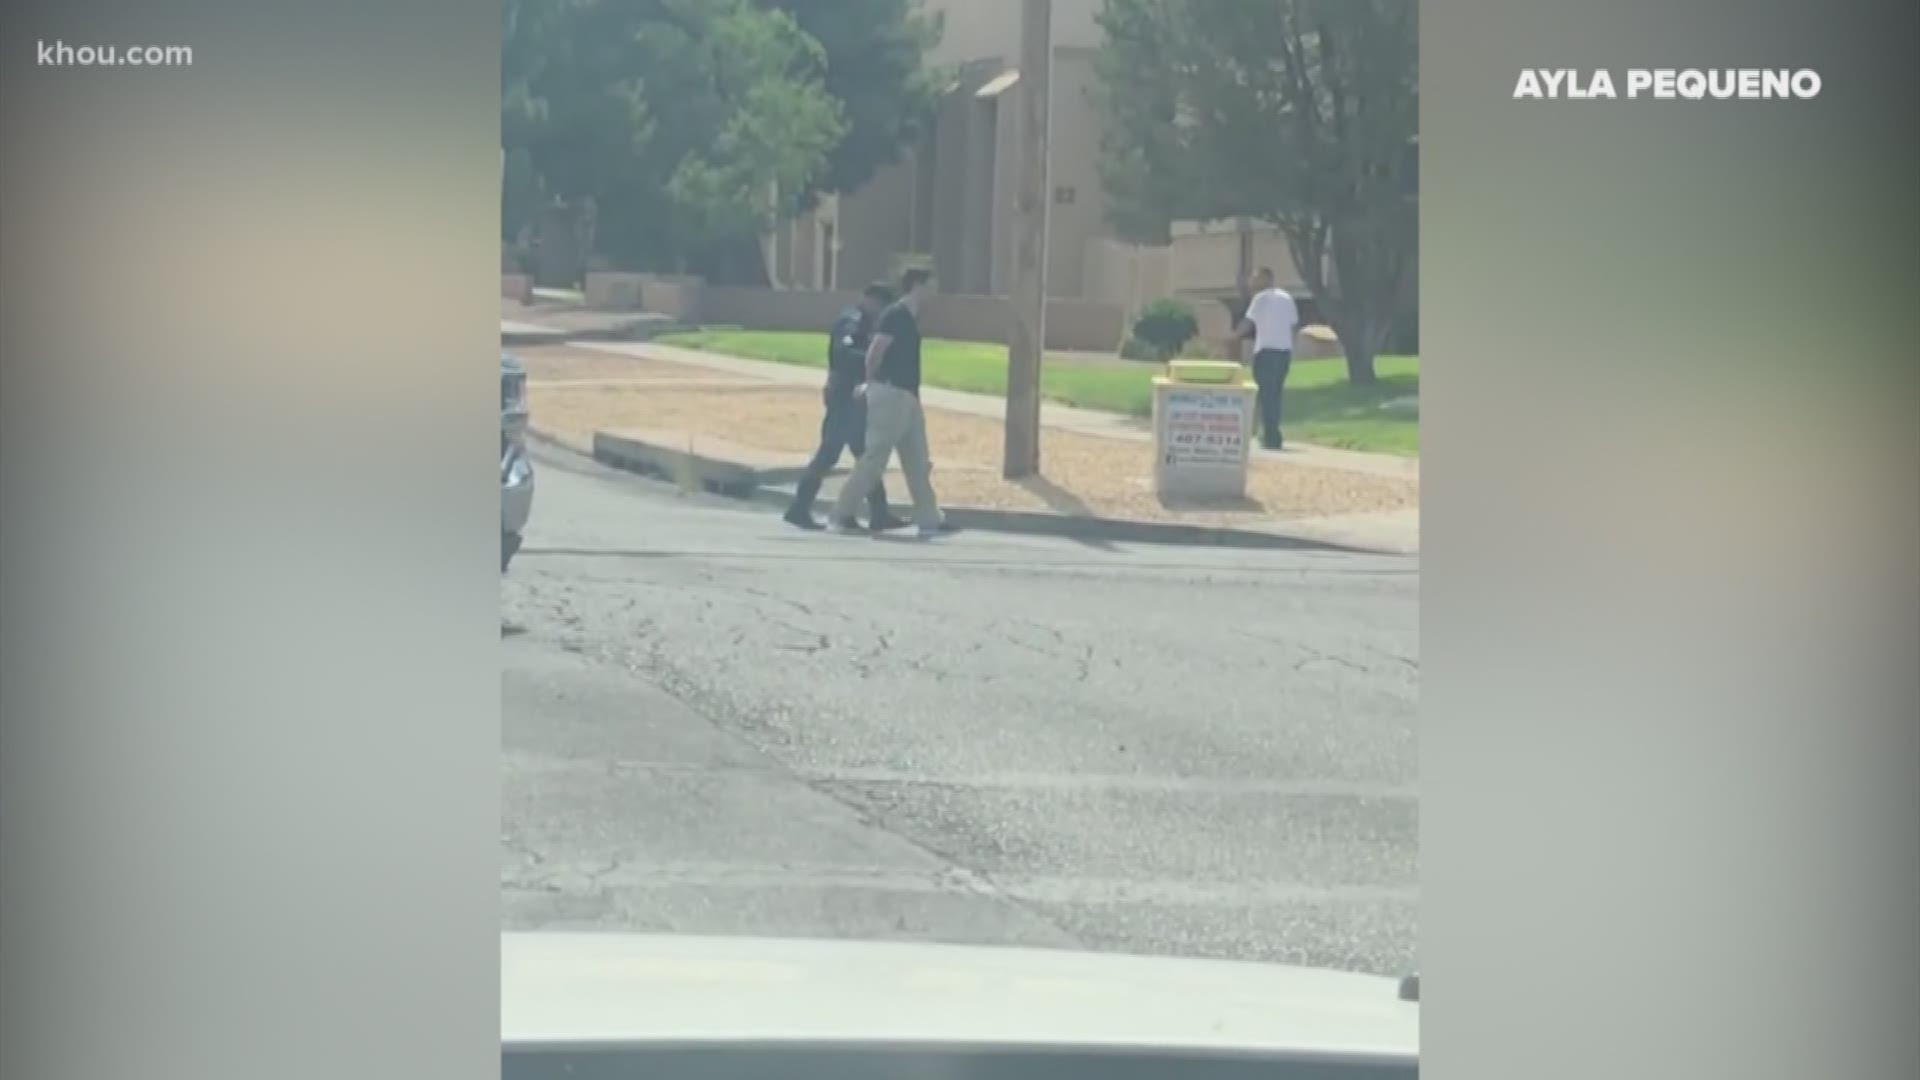 New video appears to show the suspect accused of killing 20 people in a mass shooting in El Paso.